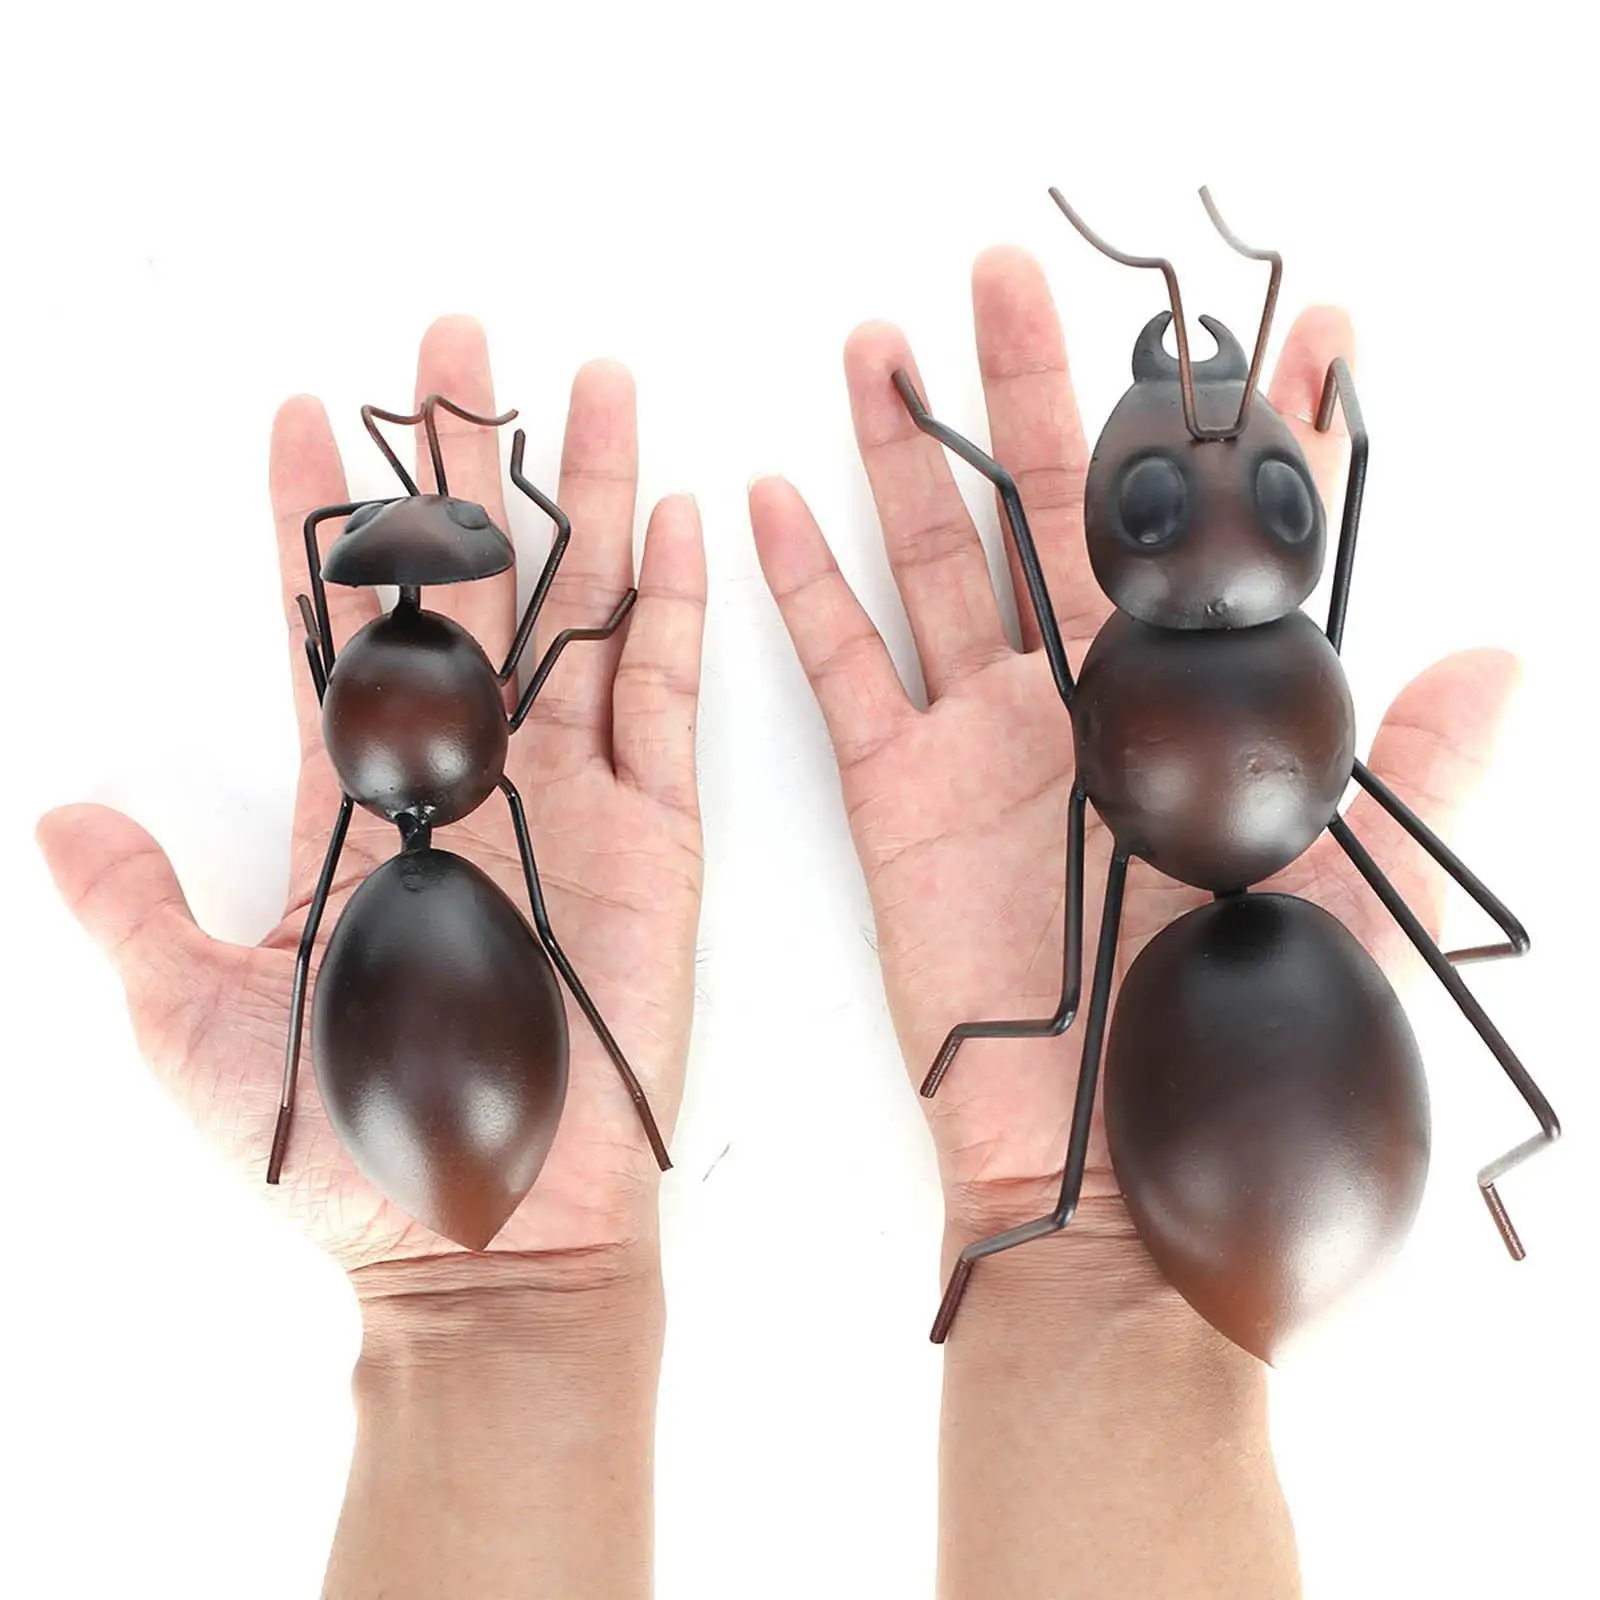 Ant Model Wall Arts Ant Ornaments Outdoor Home Living Room House Crafts